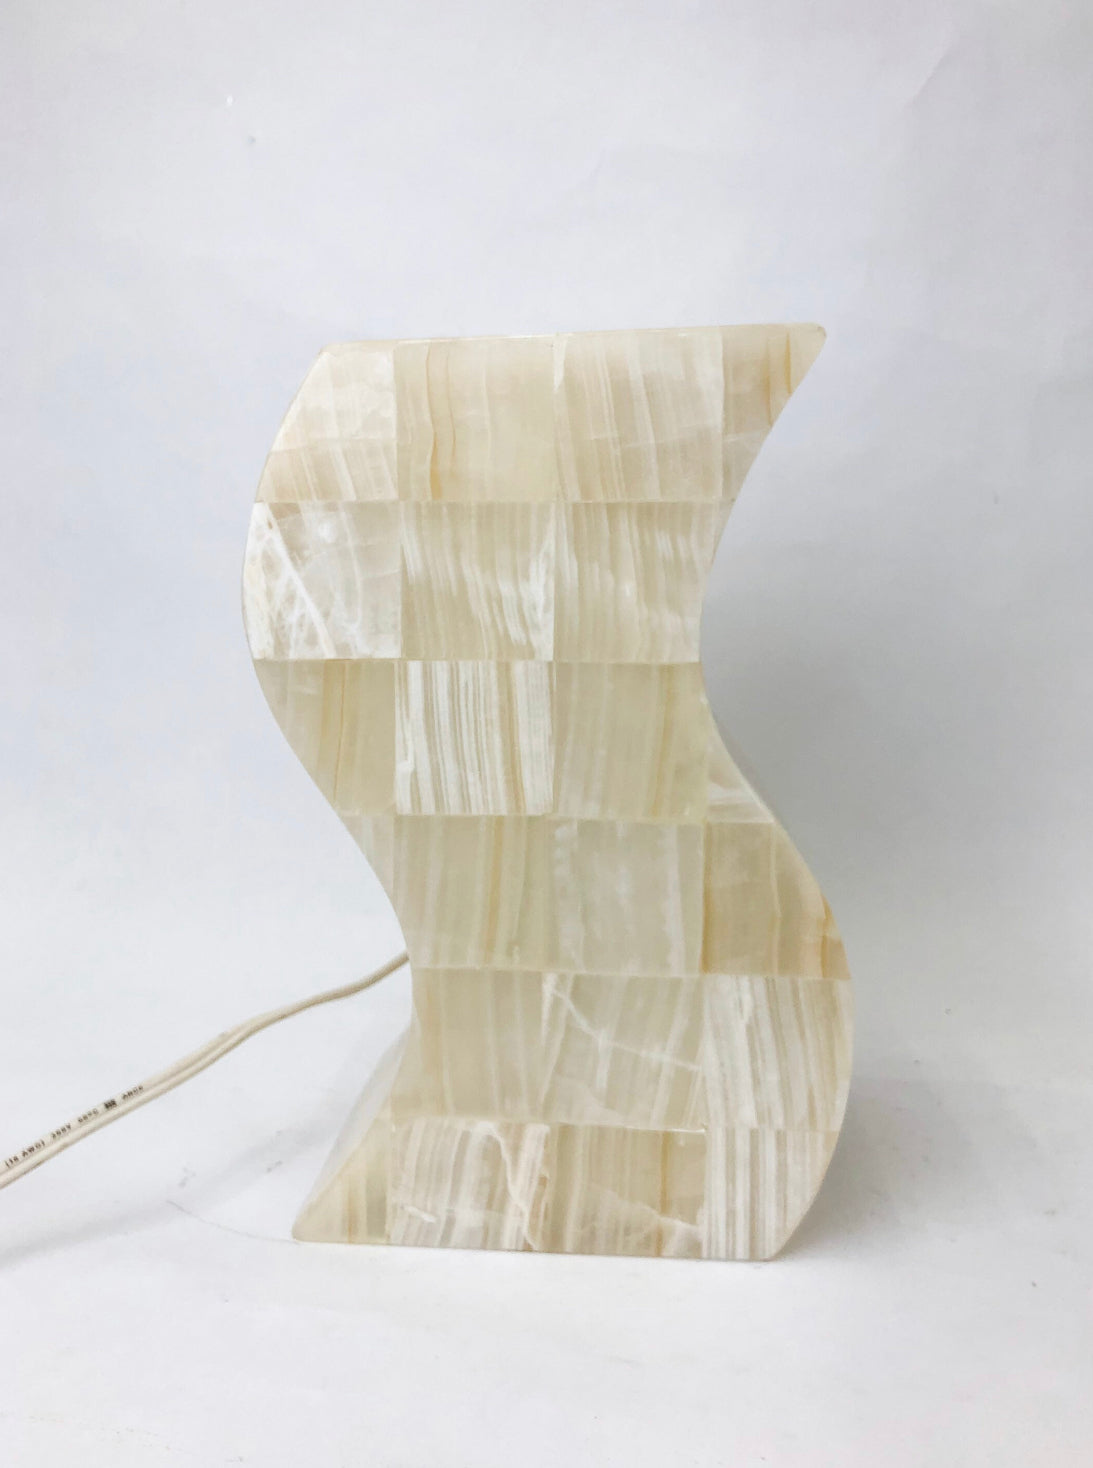 Banded Onyx S Shaped 12 Inches Table Lamp Onyx Marble Lamp